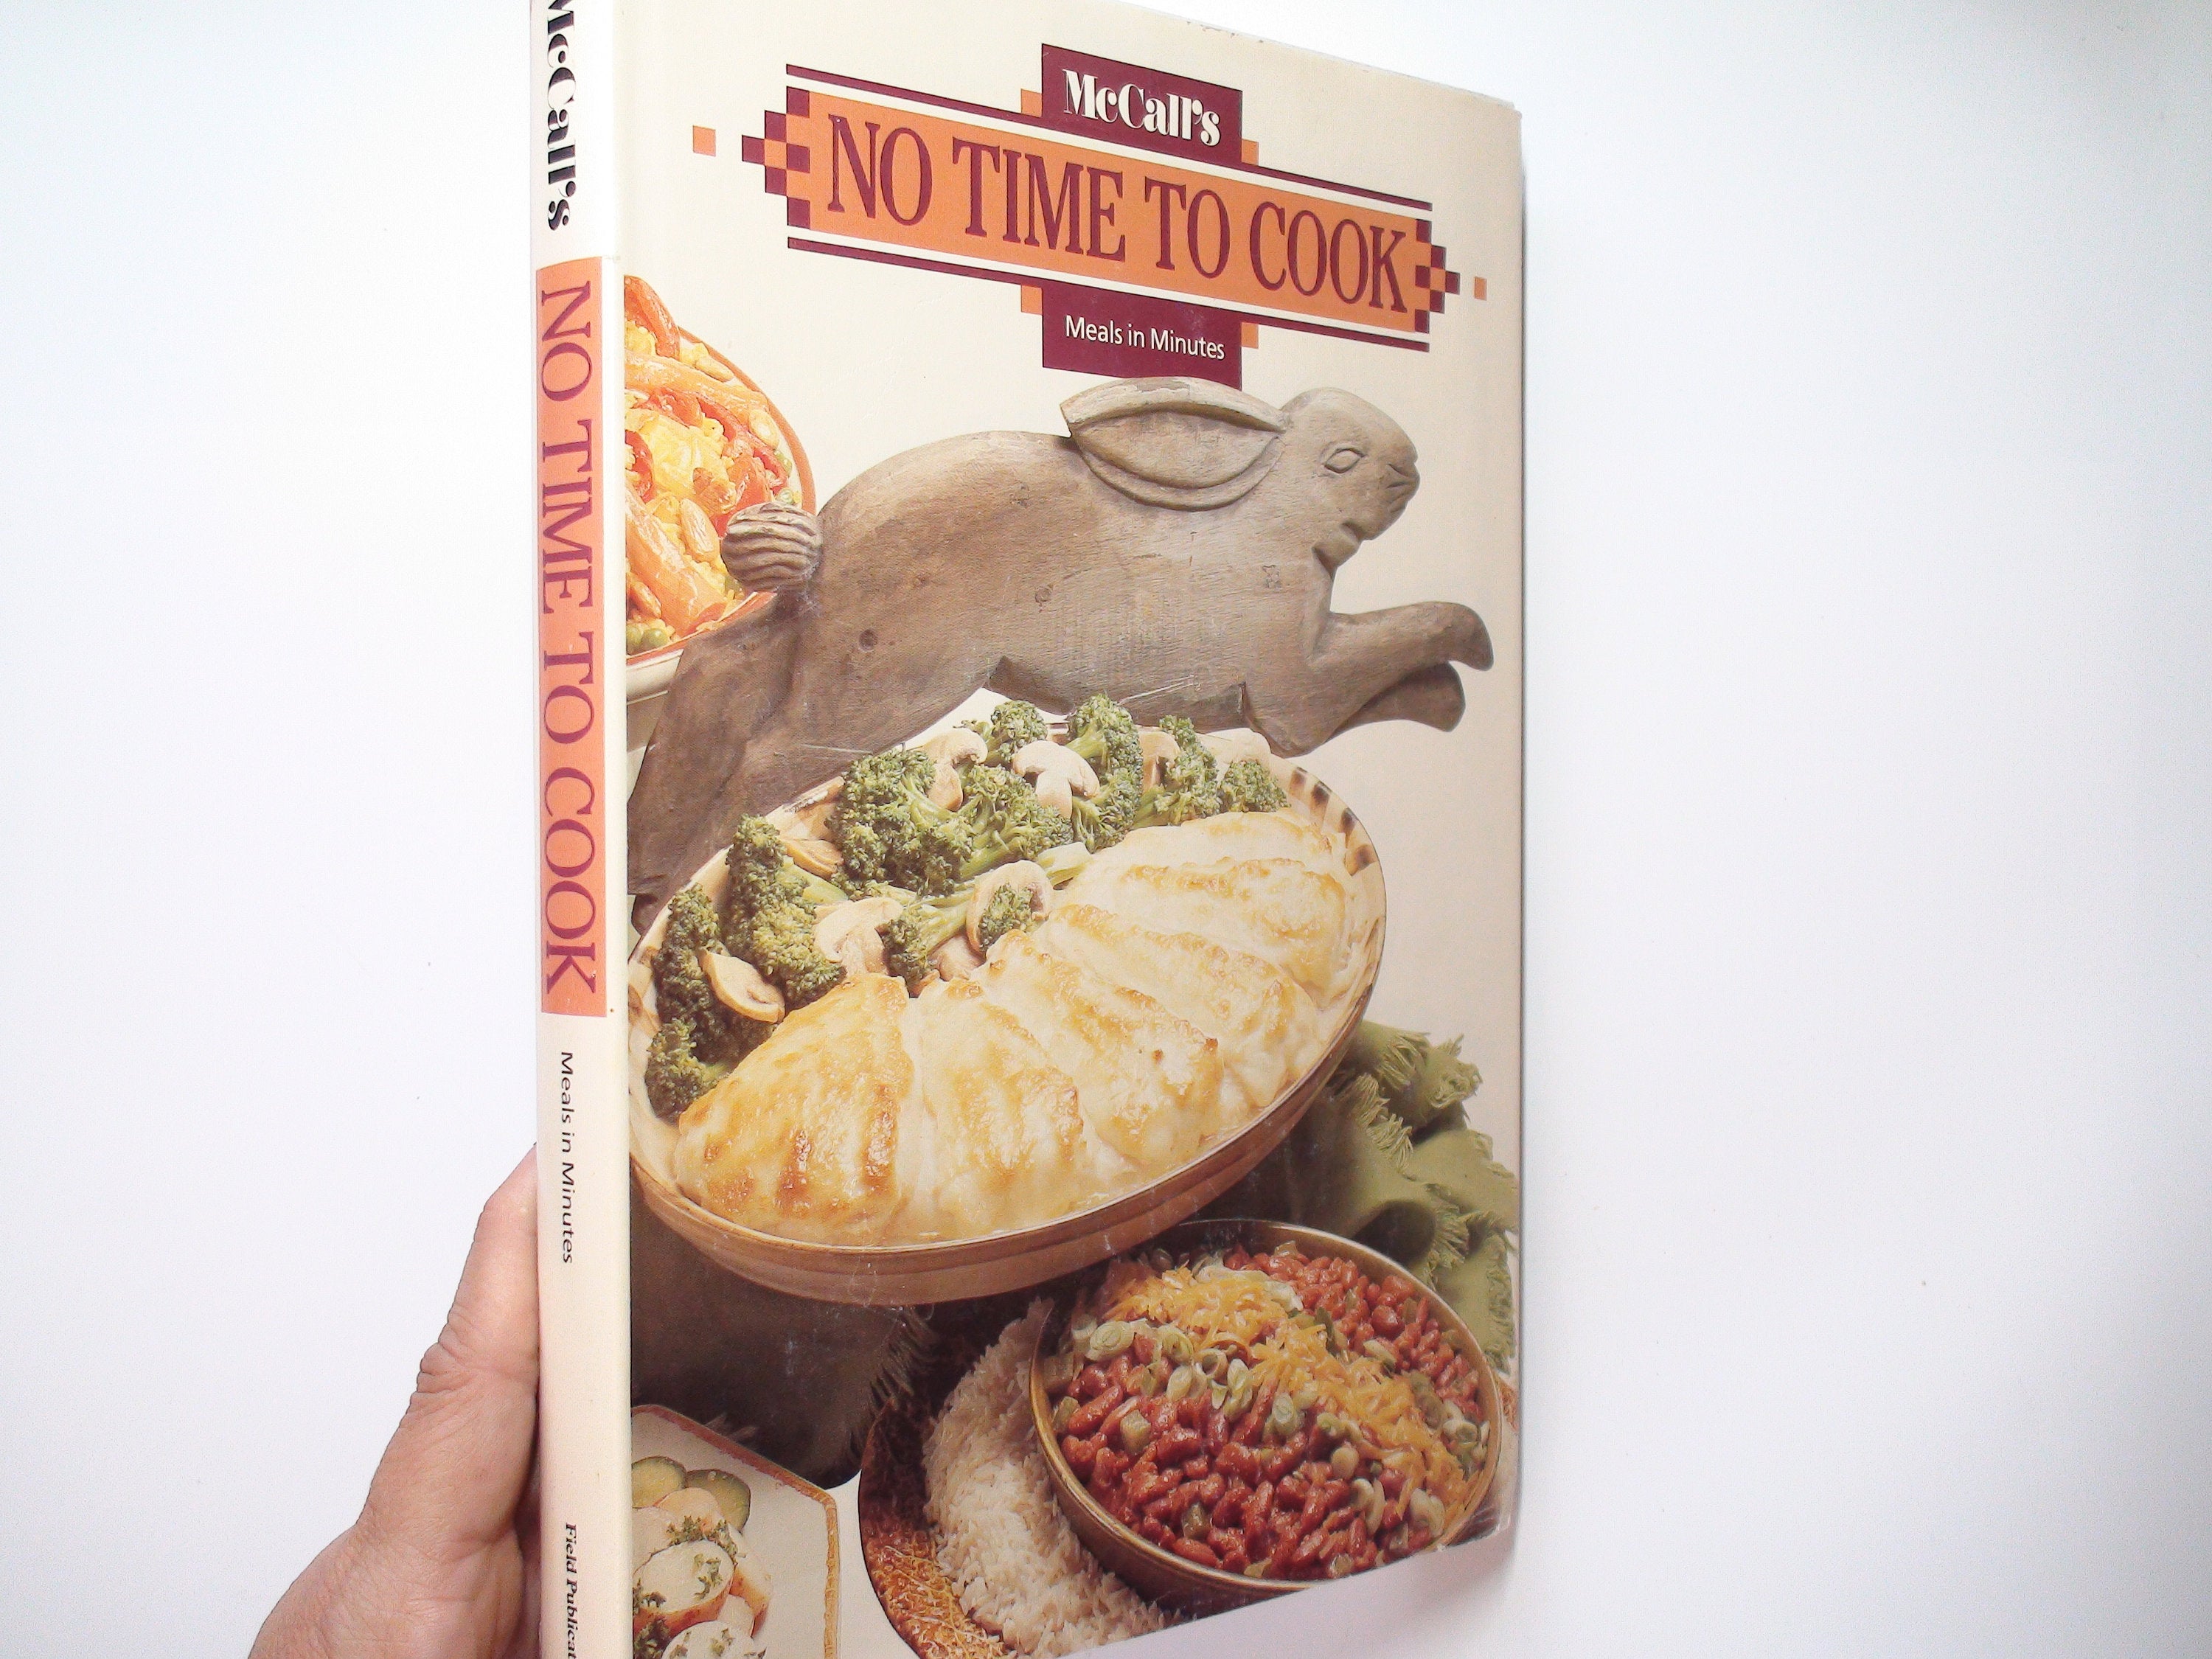 No Time to Cook, Elaine Prescott Wansavage, McCall's, 1st Ed, Illustrated, 1985